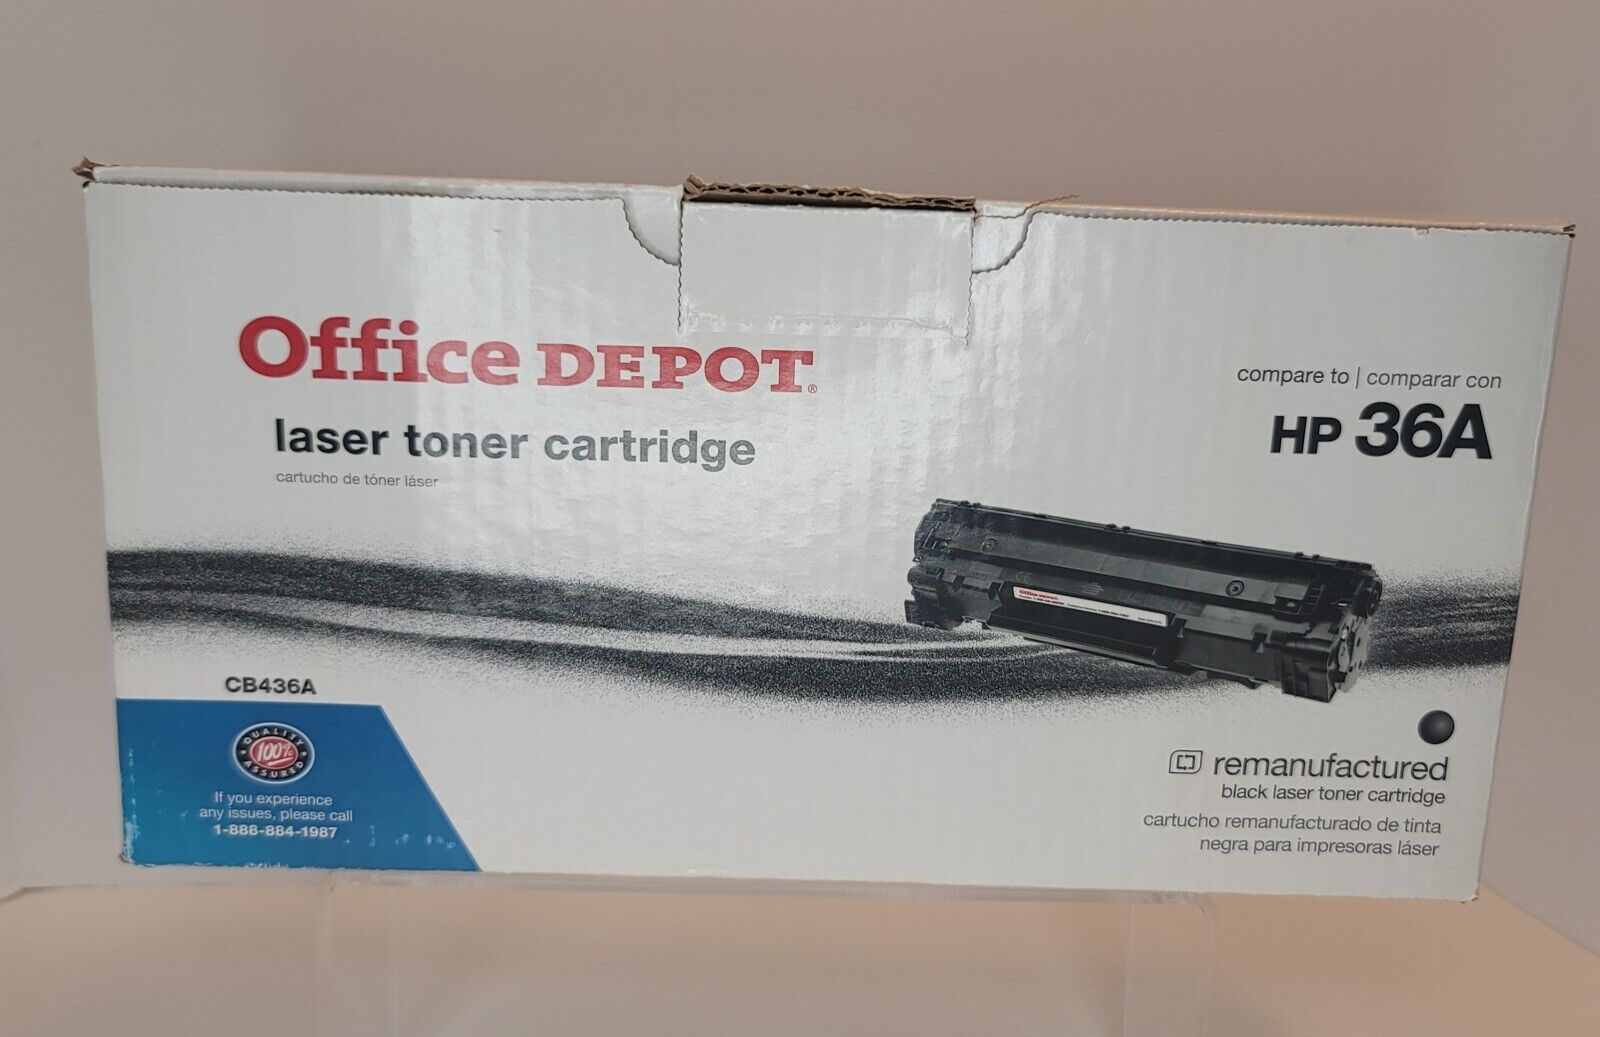 Office Depot Laser Toner Cartridge CB436A Black Compares to HP 36A